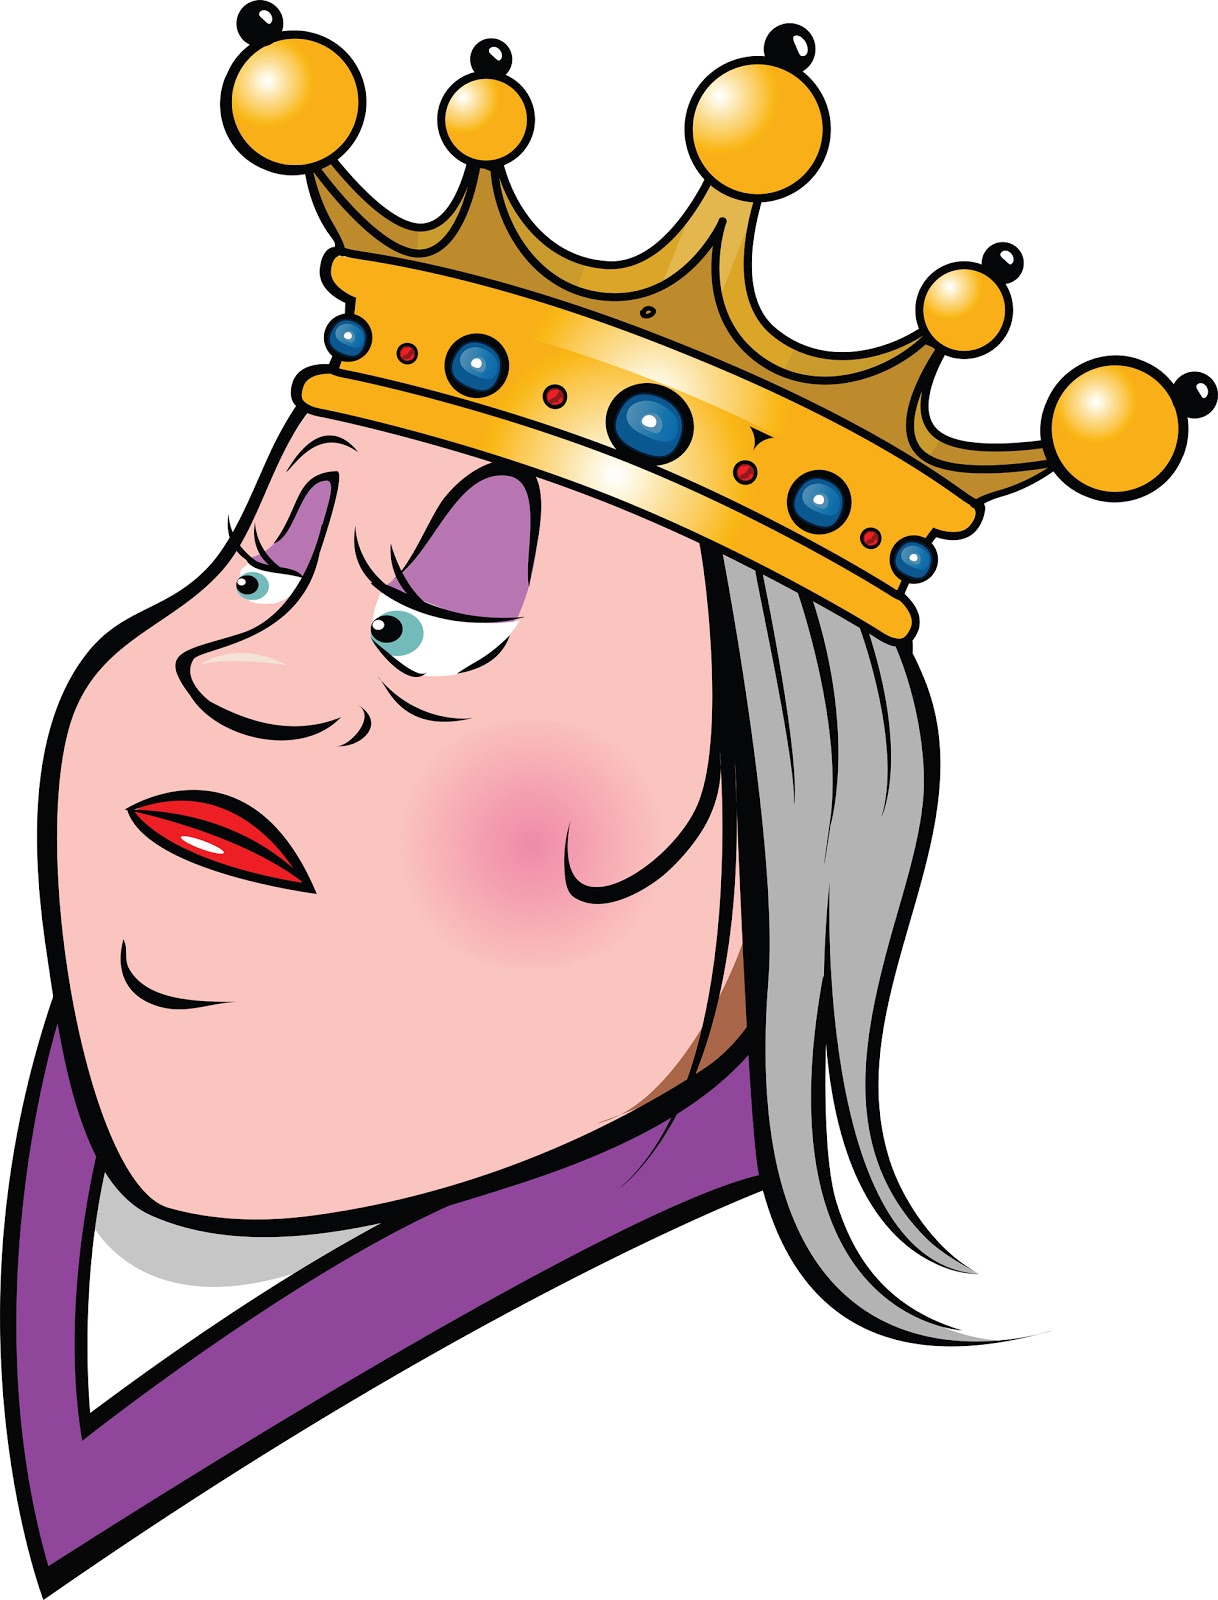 Free Animated Queen Cliparts, Download Free Clip Art, Free ...